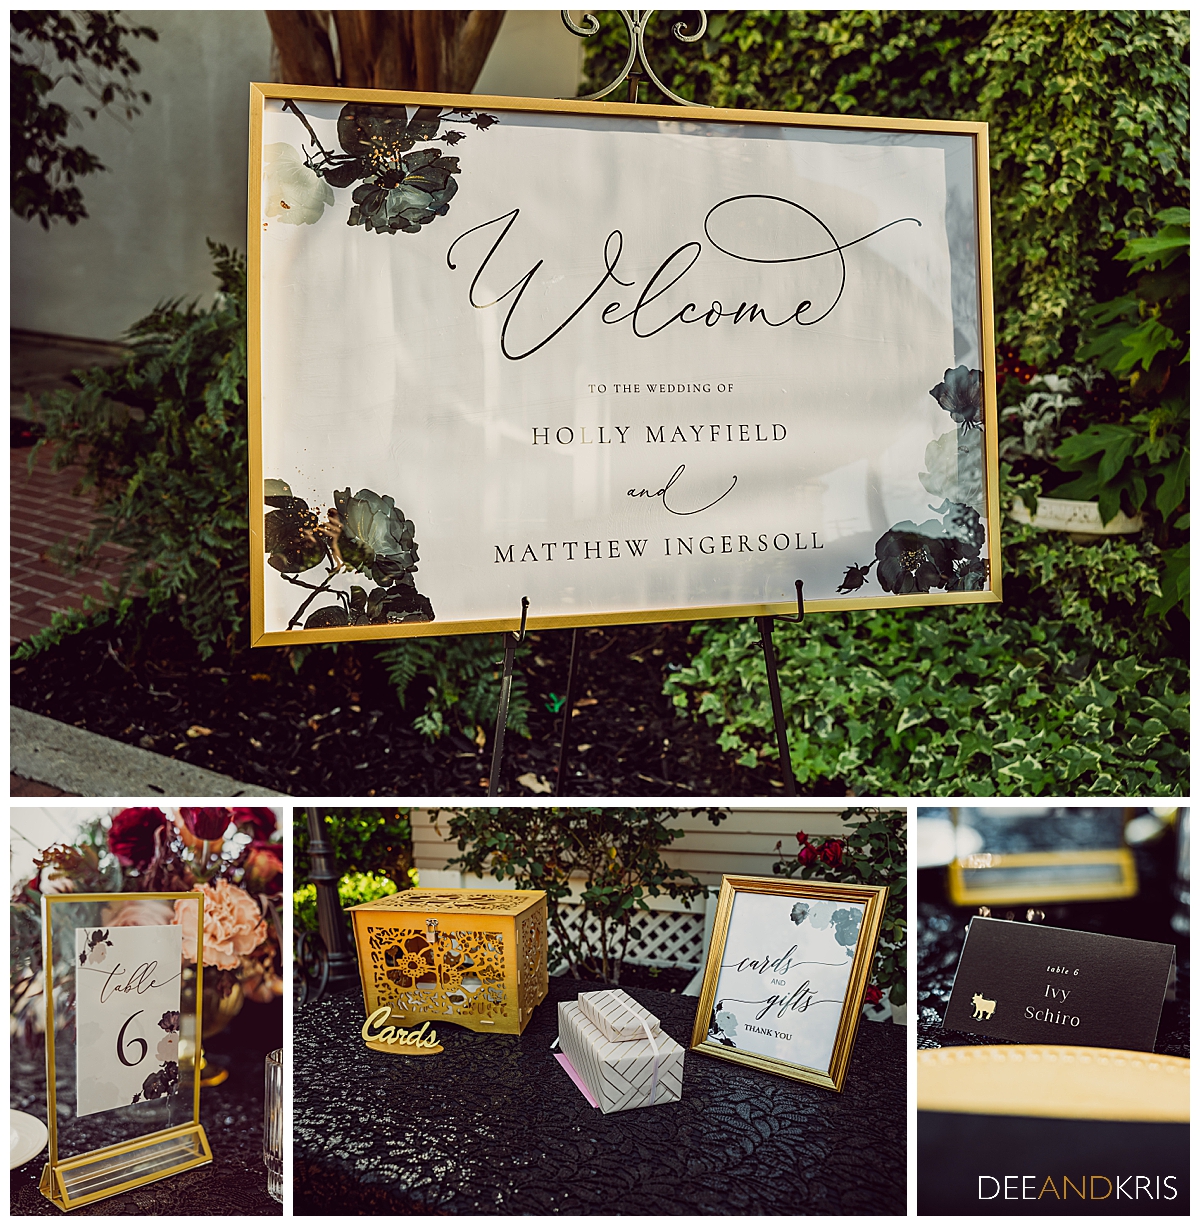 Four images of various signs for the wedding.